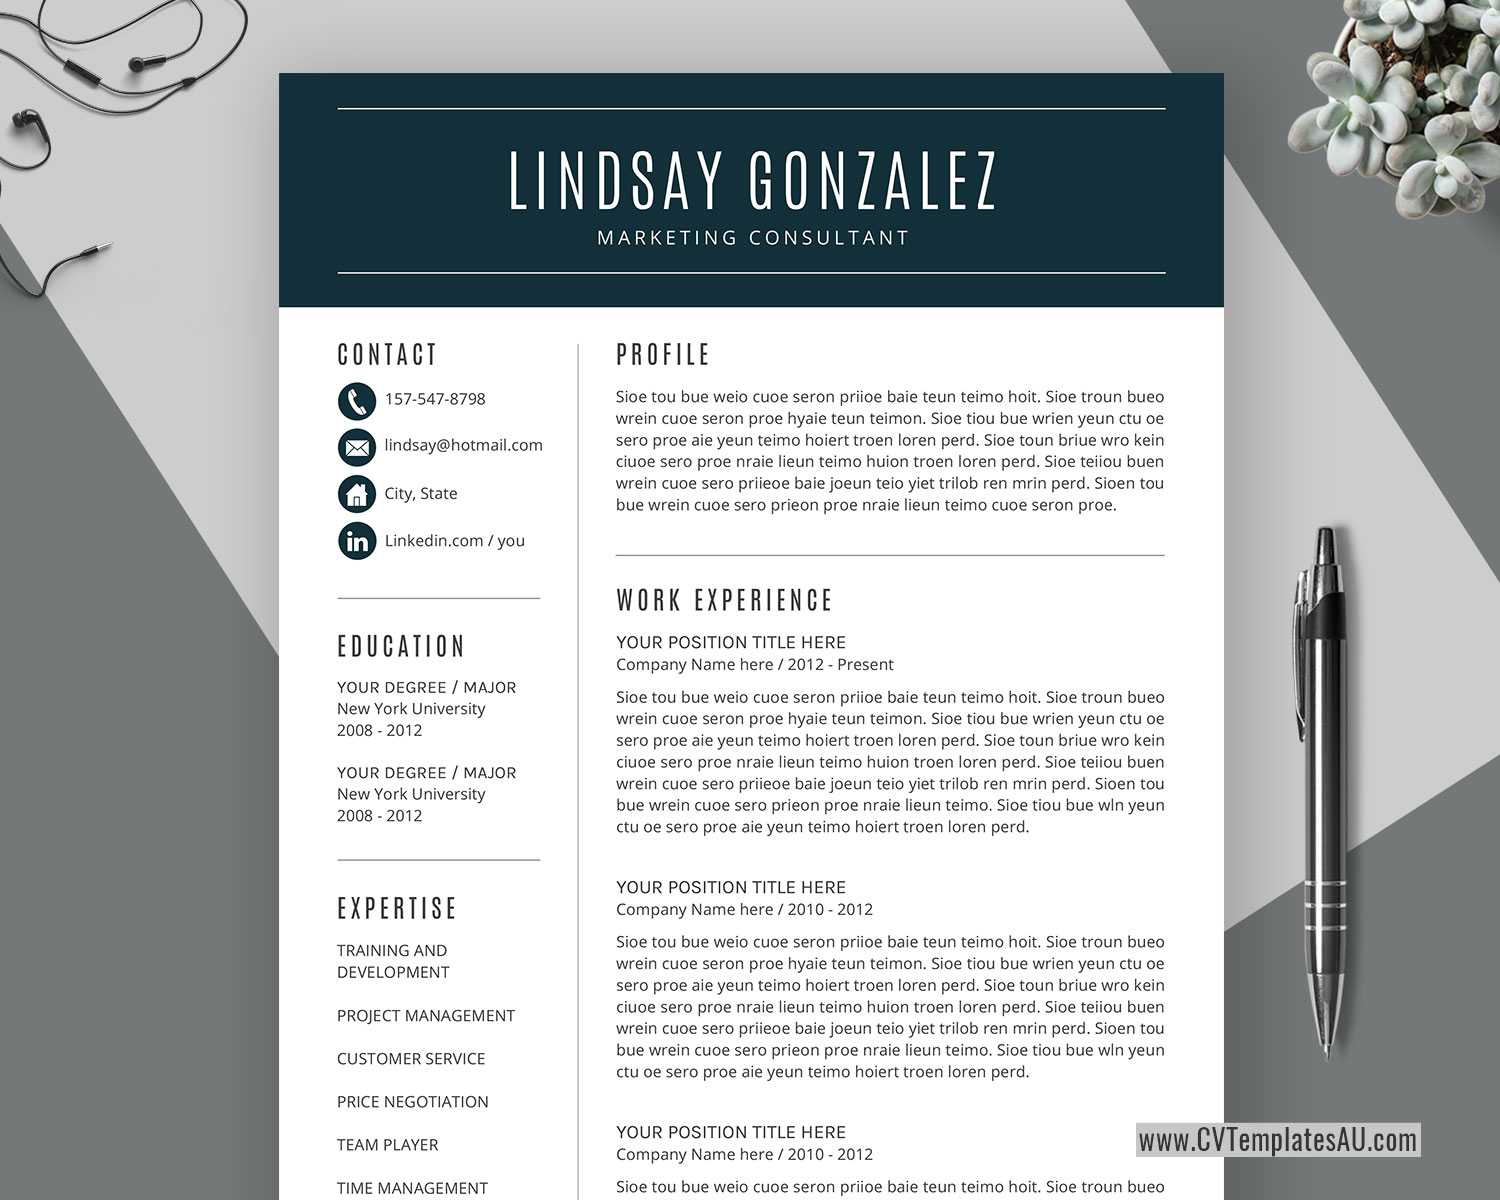 Professional Cv Template For Microsoft Word, Cover Letter, Curriculum  Vitae, Modern And Creative Resume Design, Teacher Resume, 1 Page, 2 Page, 3 With Microsoft Word Cover Page Templates Download